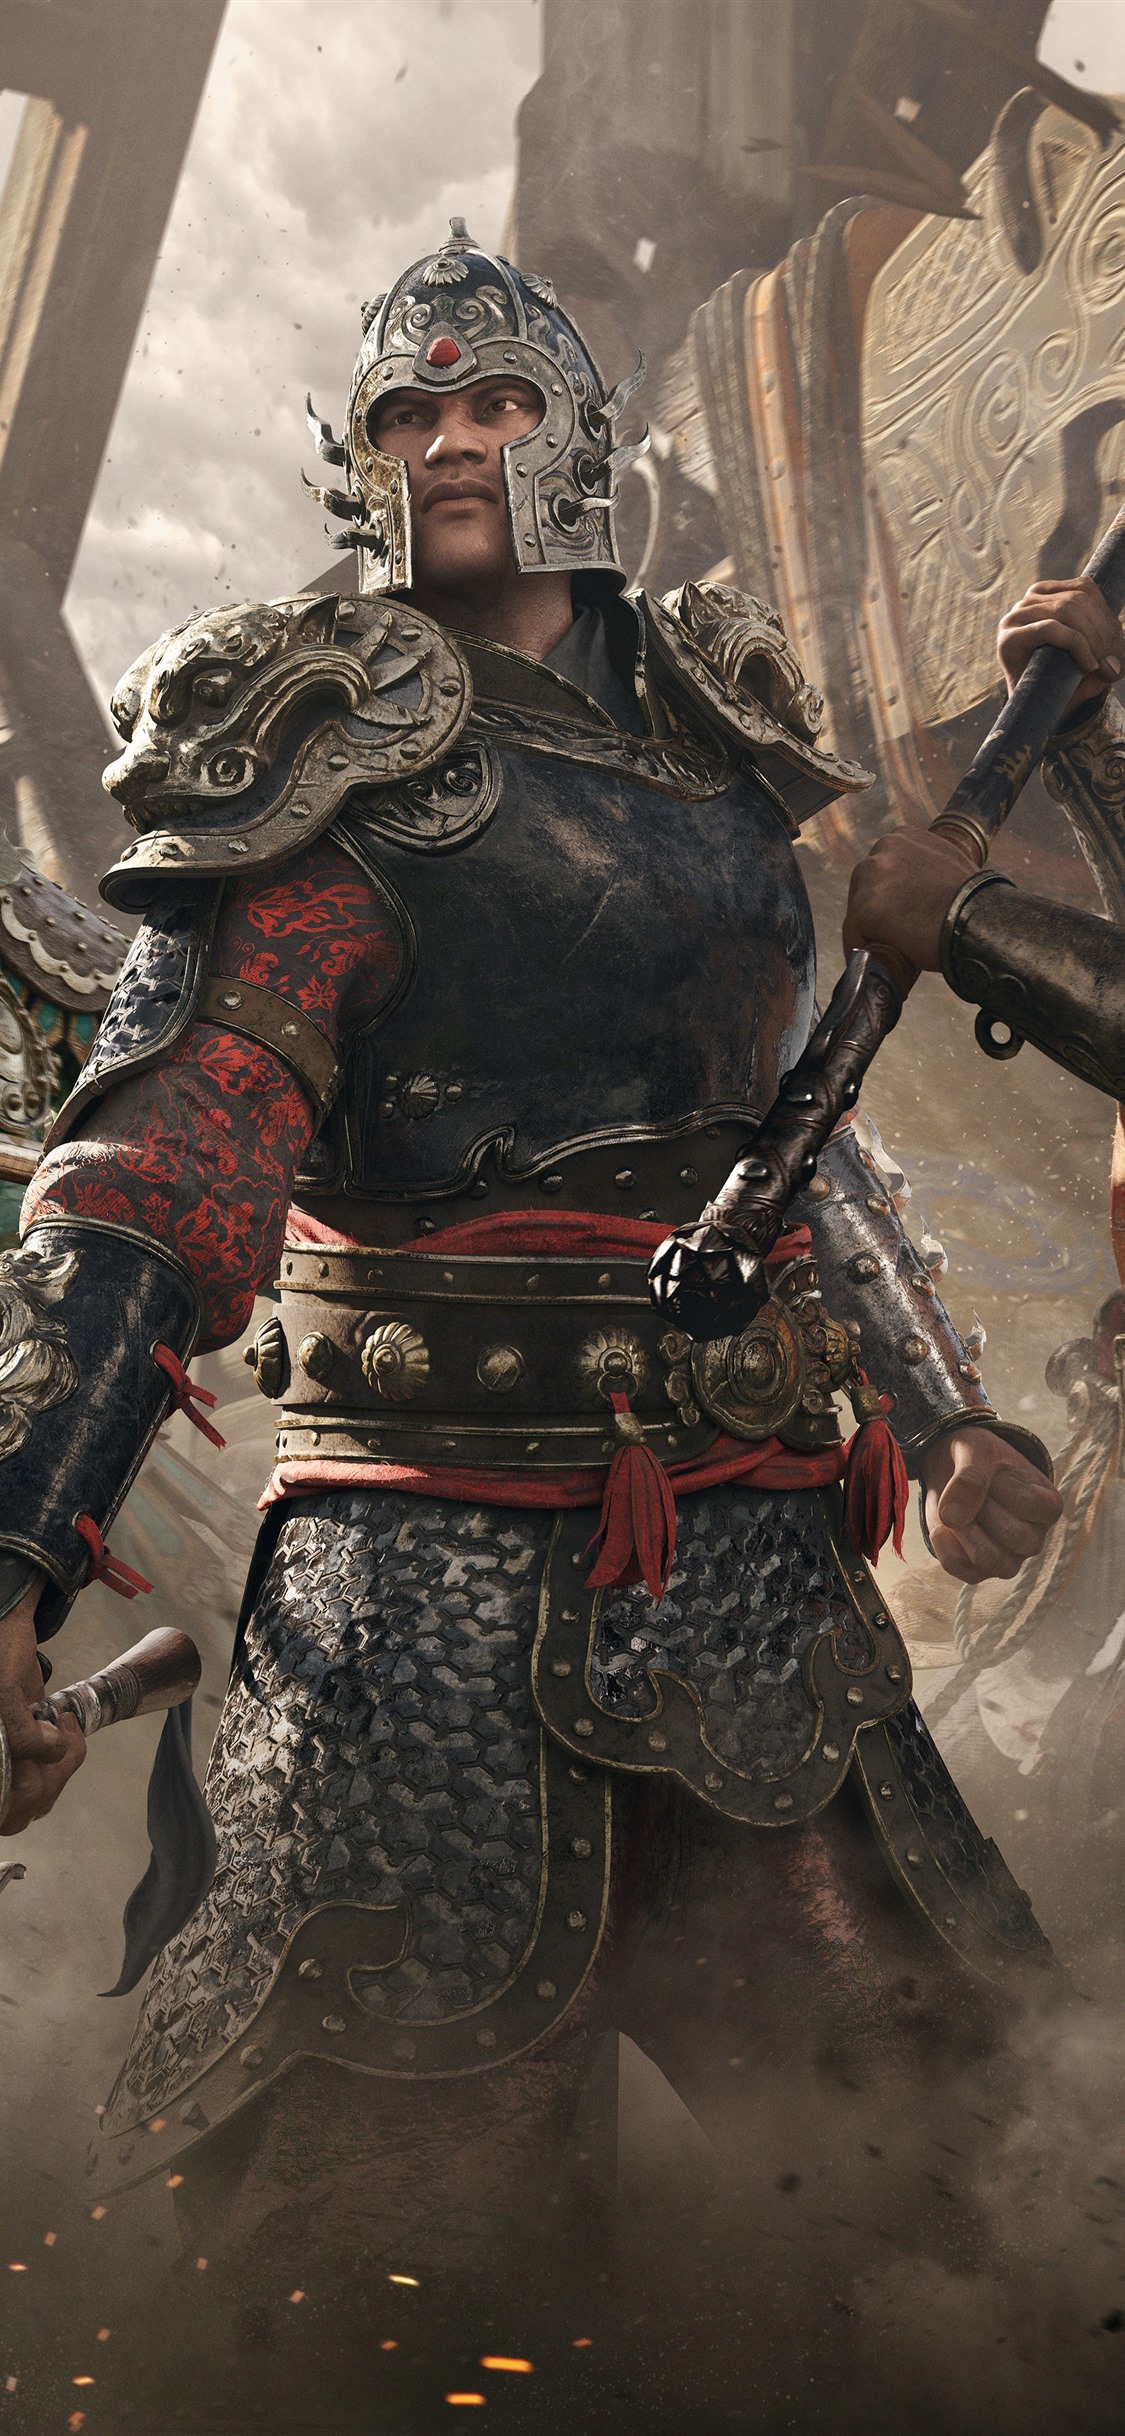 Iphone Wallpaper For Honor, 2018 E3 - Honor Marching Fire - HD Wallpaper 